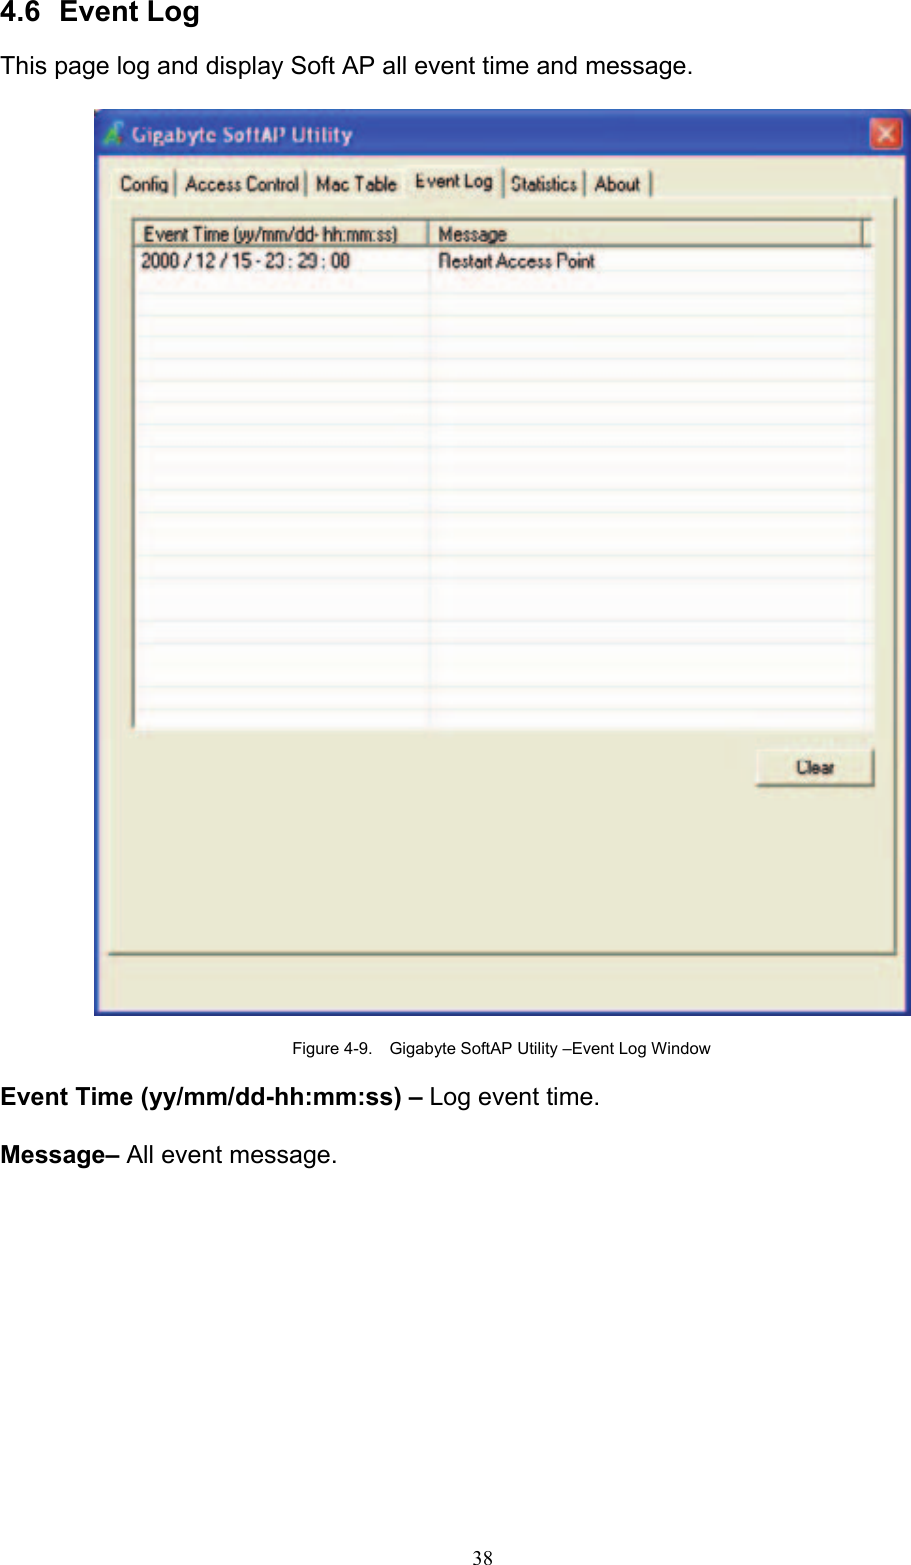 38   4.6 Event Log  This page log and display Soft AP all event time and message.    Figure 4-9.    Gigabyte SoftAP Utility –Event Log Window  Event Time (yy/mm/dd-hh:mm:ss) – Log event time.  Message– All event message.   